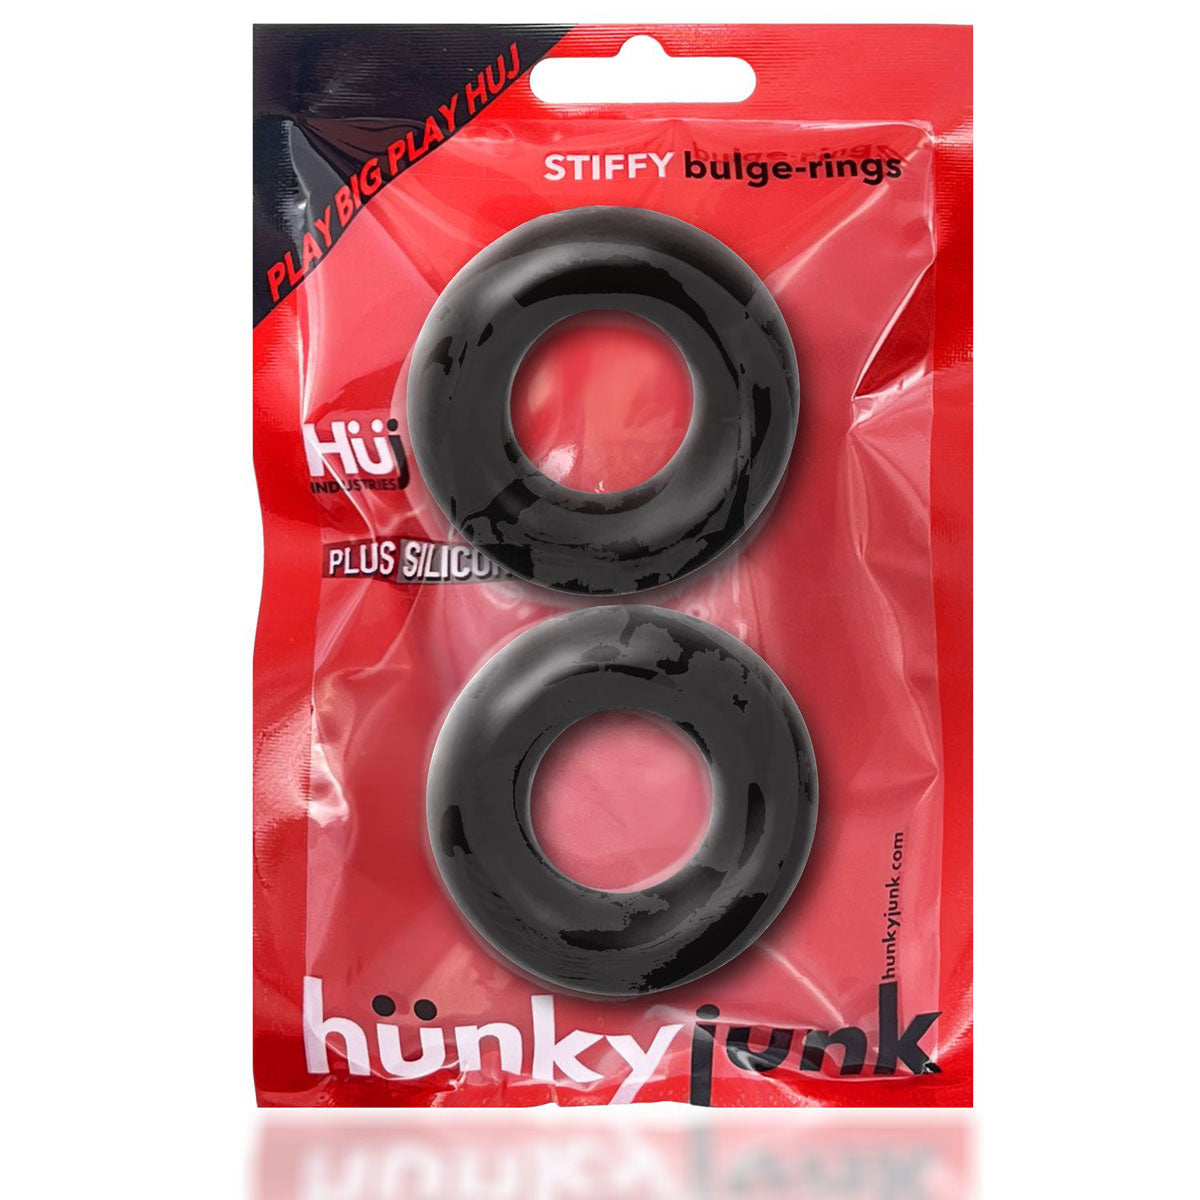 Oxballs Silicone Hunky Junk - 2 Pack C-Rings - Tar Ice